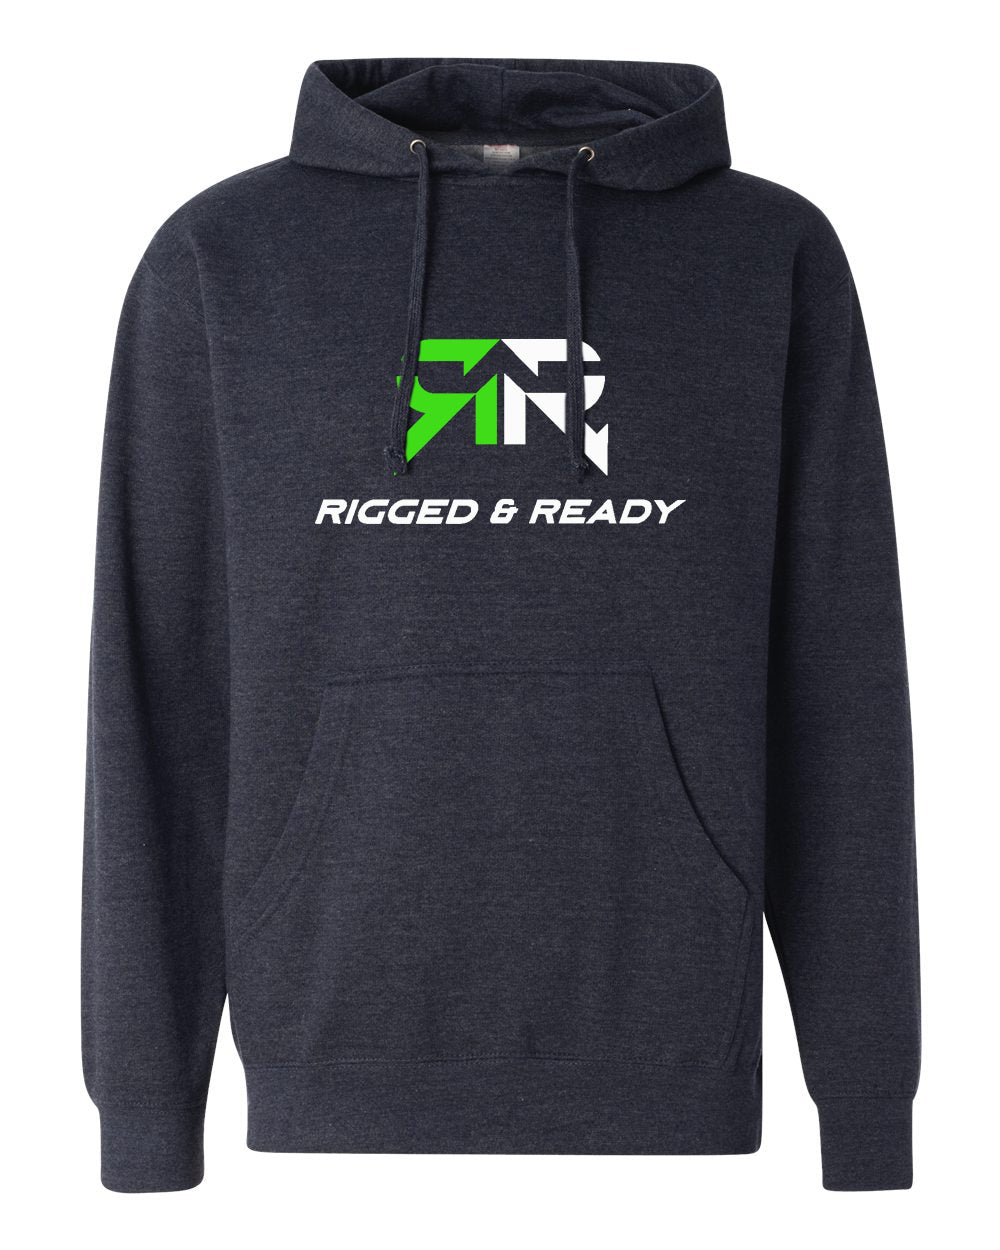 Rigged & Ready Mid Weight Hoodie